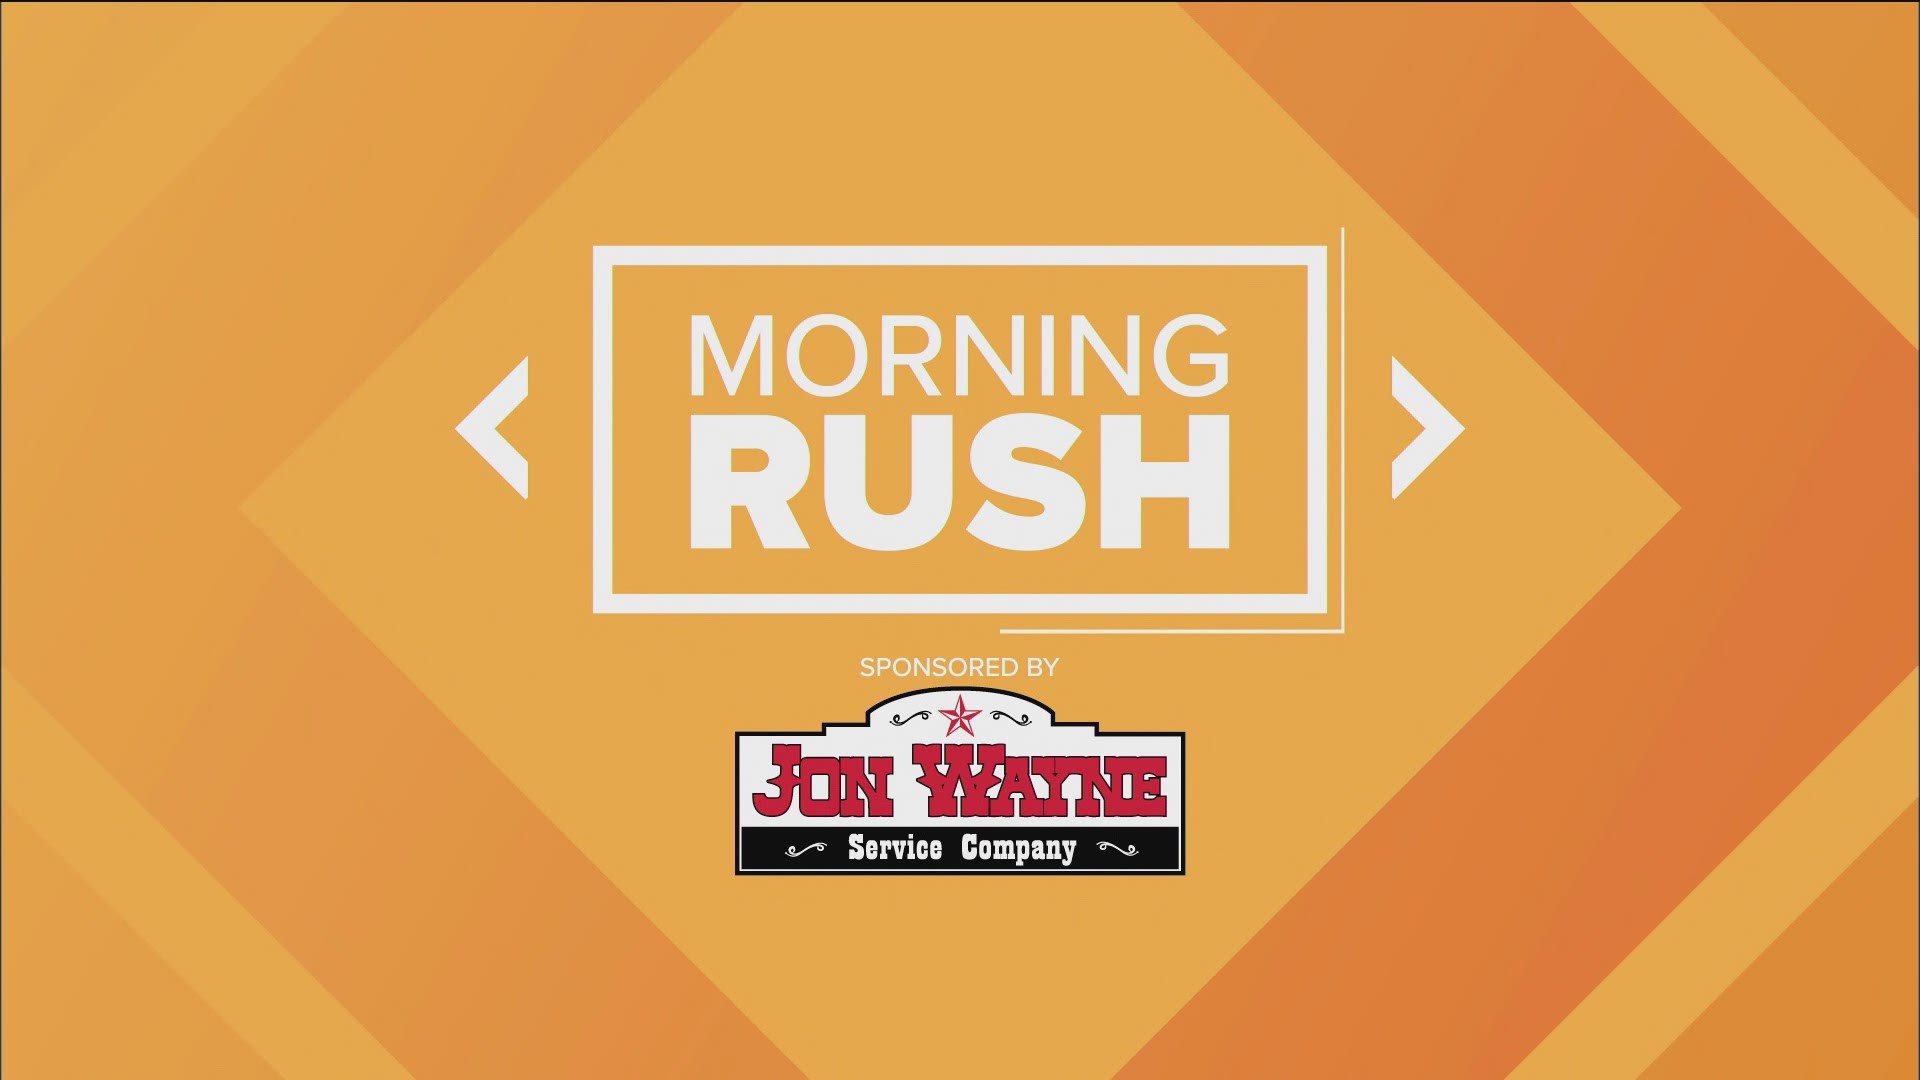 In today's Morning Rush, we're taking a look at your headlines for Friday, July 24.